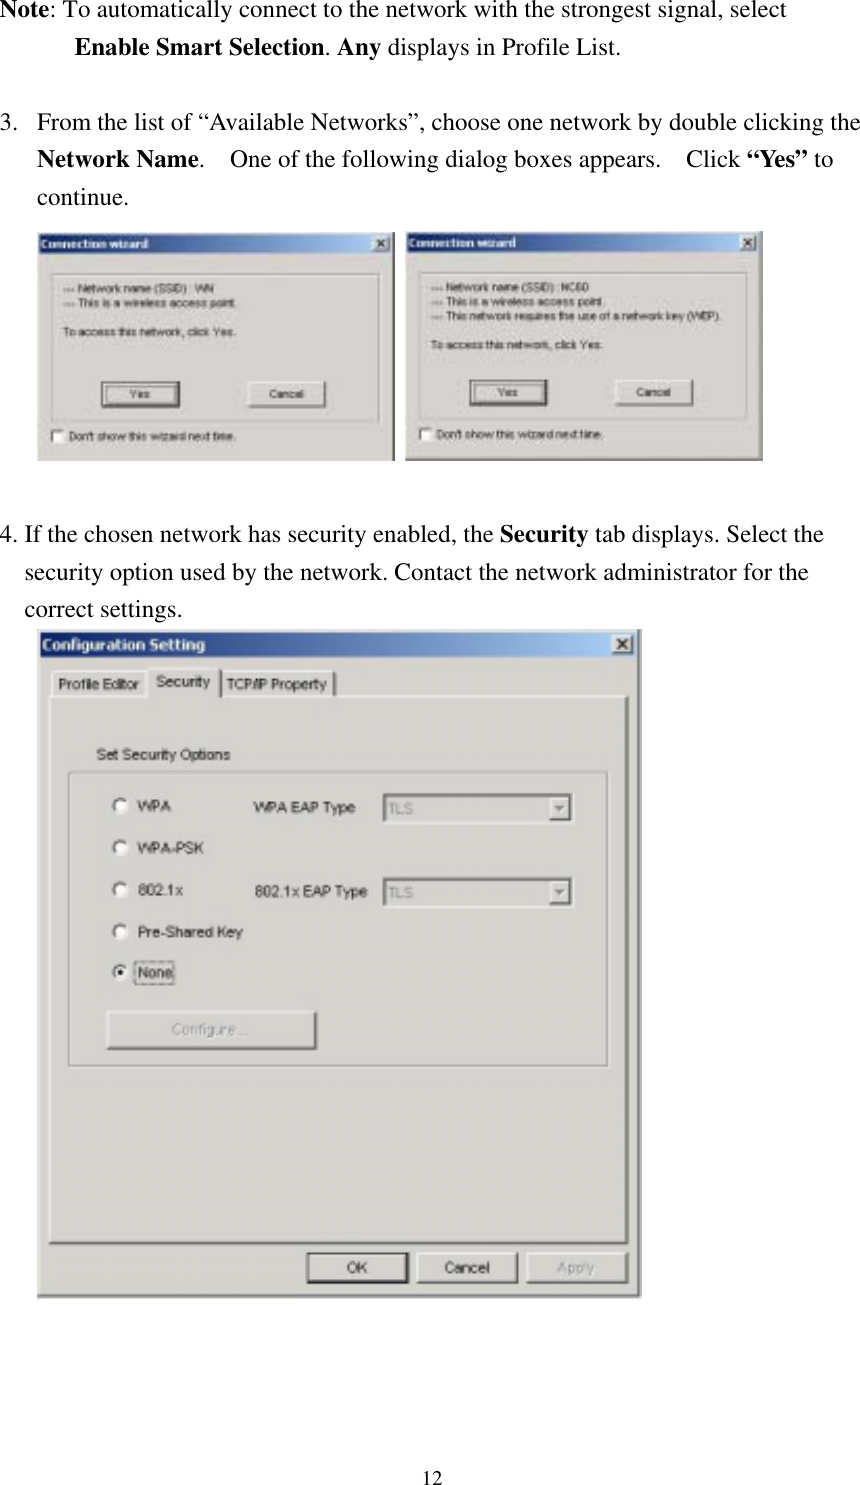  12Note: To automatically connect to the network with the strongest signal, select Enable Smart Selection. Any displays in Profile List.  3.  From the list of “Available Networks”, choose one network by double clicking the Network Name.    One of the following dialog boxes appears.    Click “Yes” to continue.     4. If the chosen network has security enabled, the Security tab displays. Select the security option used by the network. Contact the network administrator for the correct settings.     